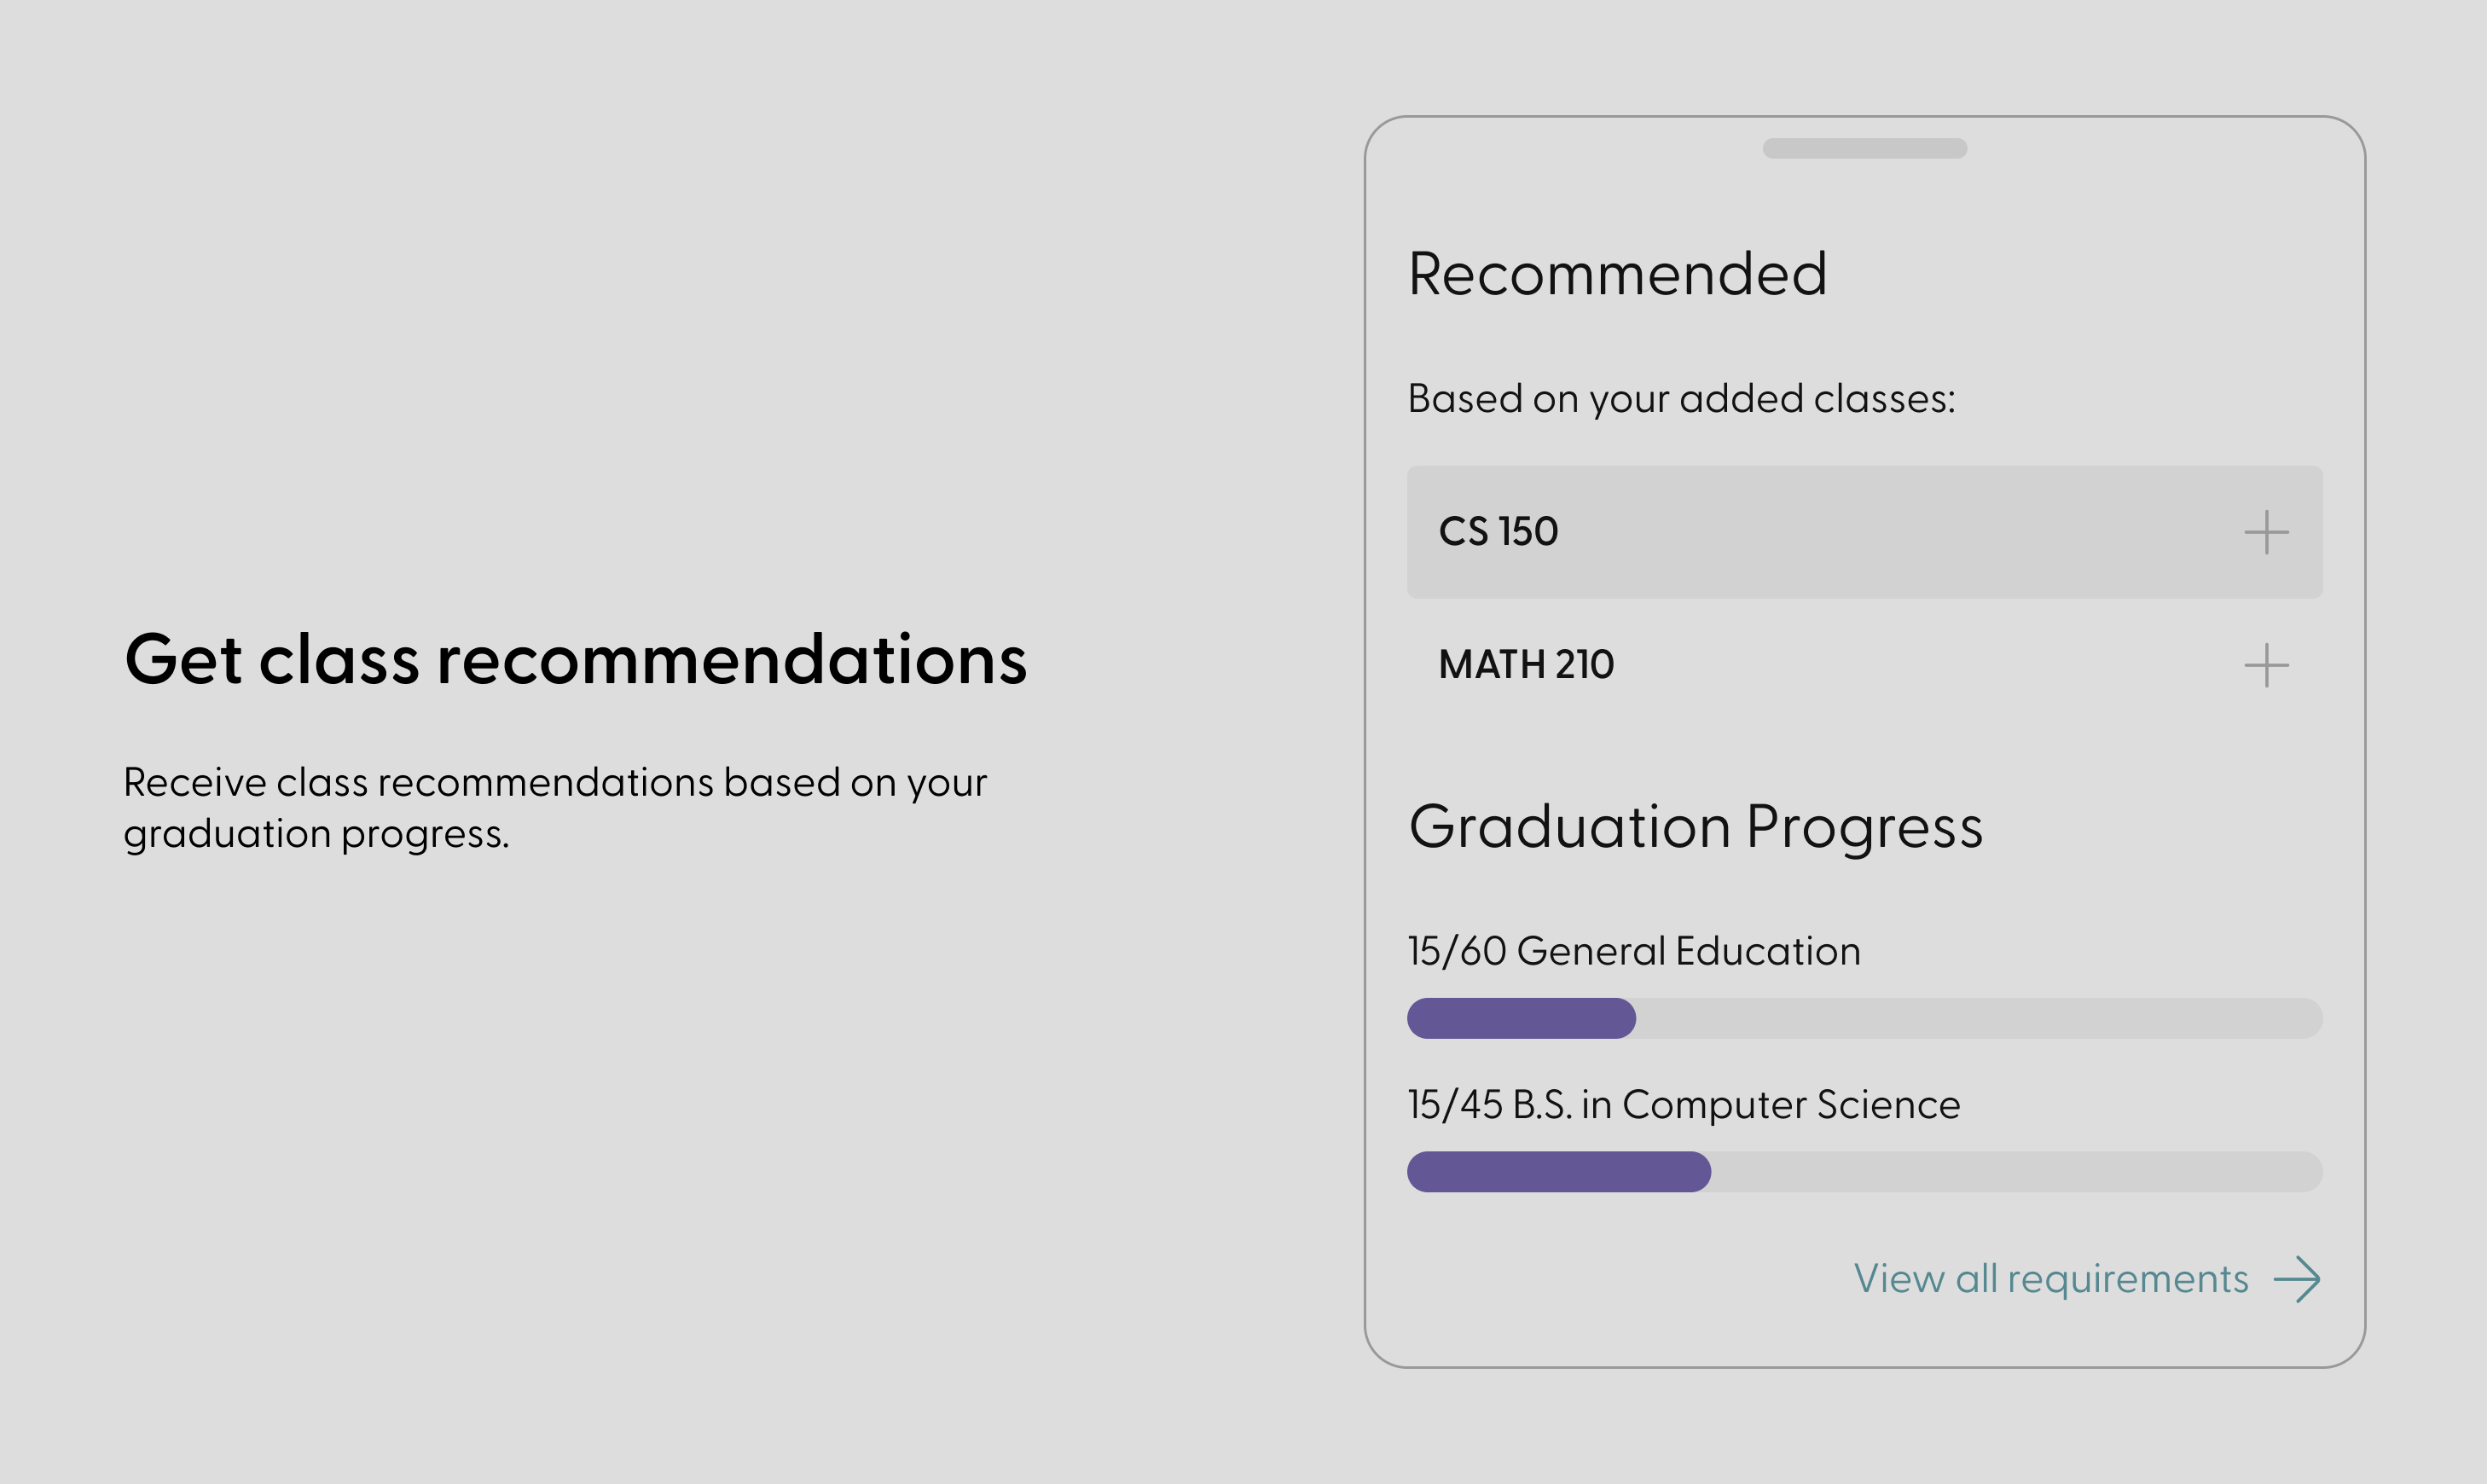 Get class recommendations based on your saved classes and graduation requirements.